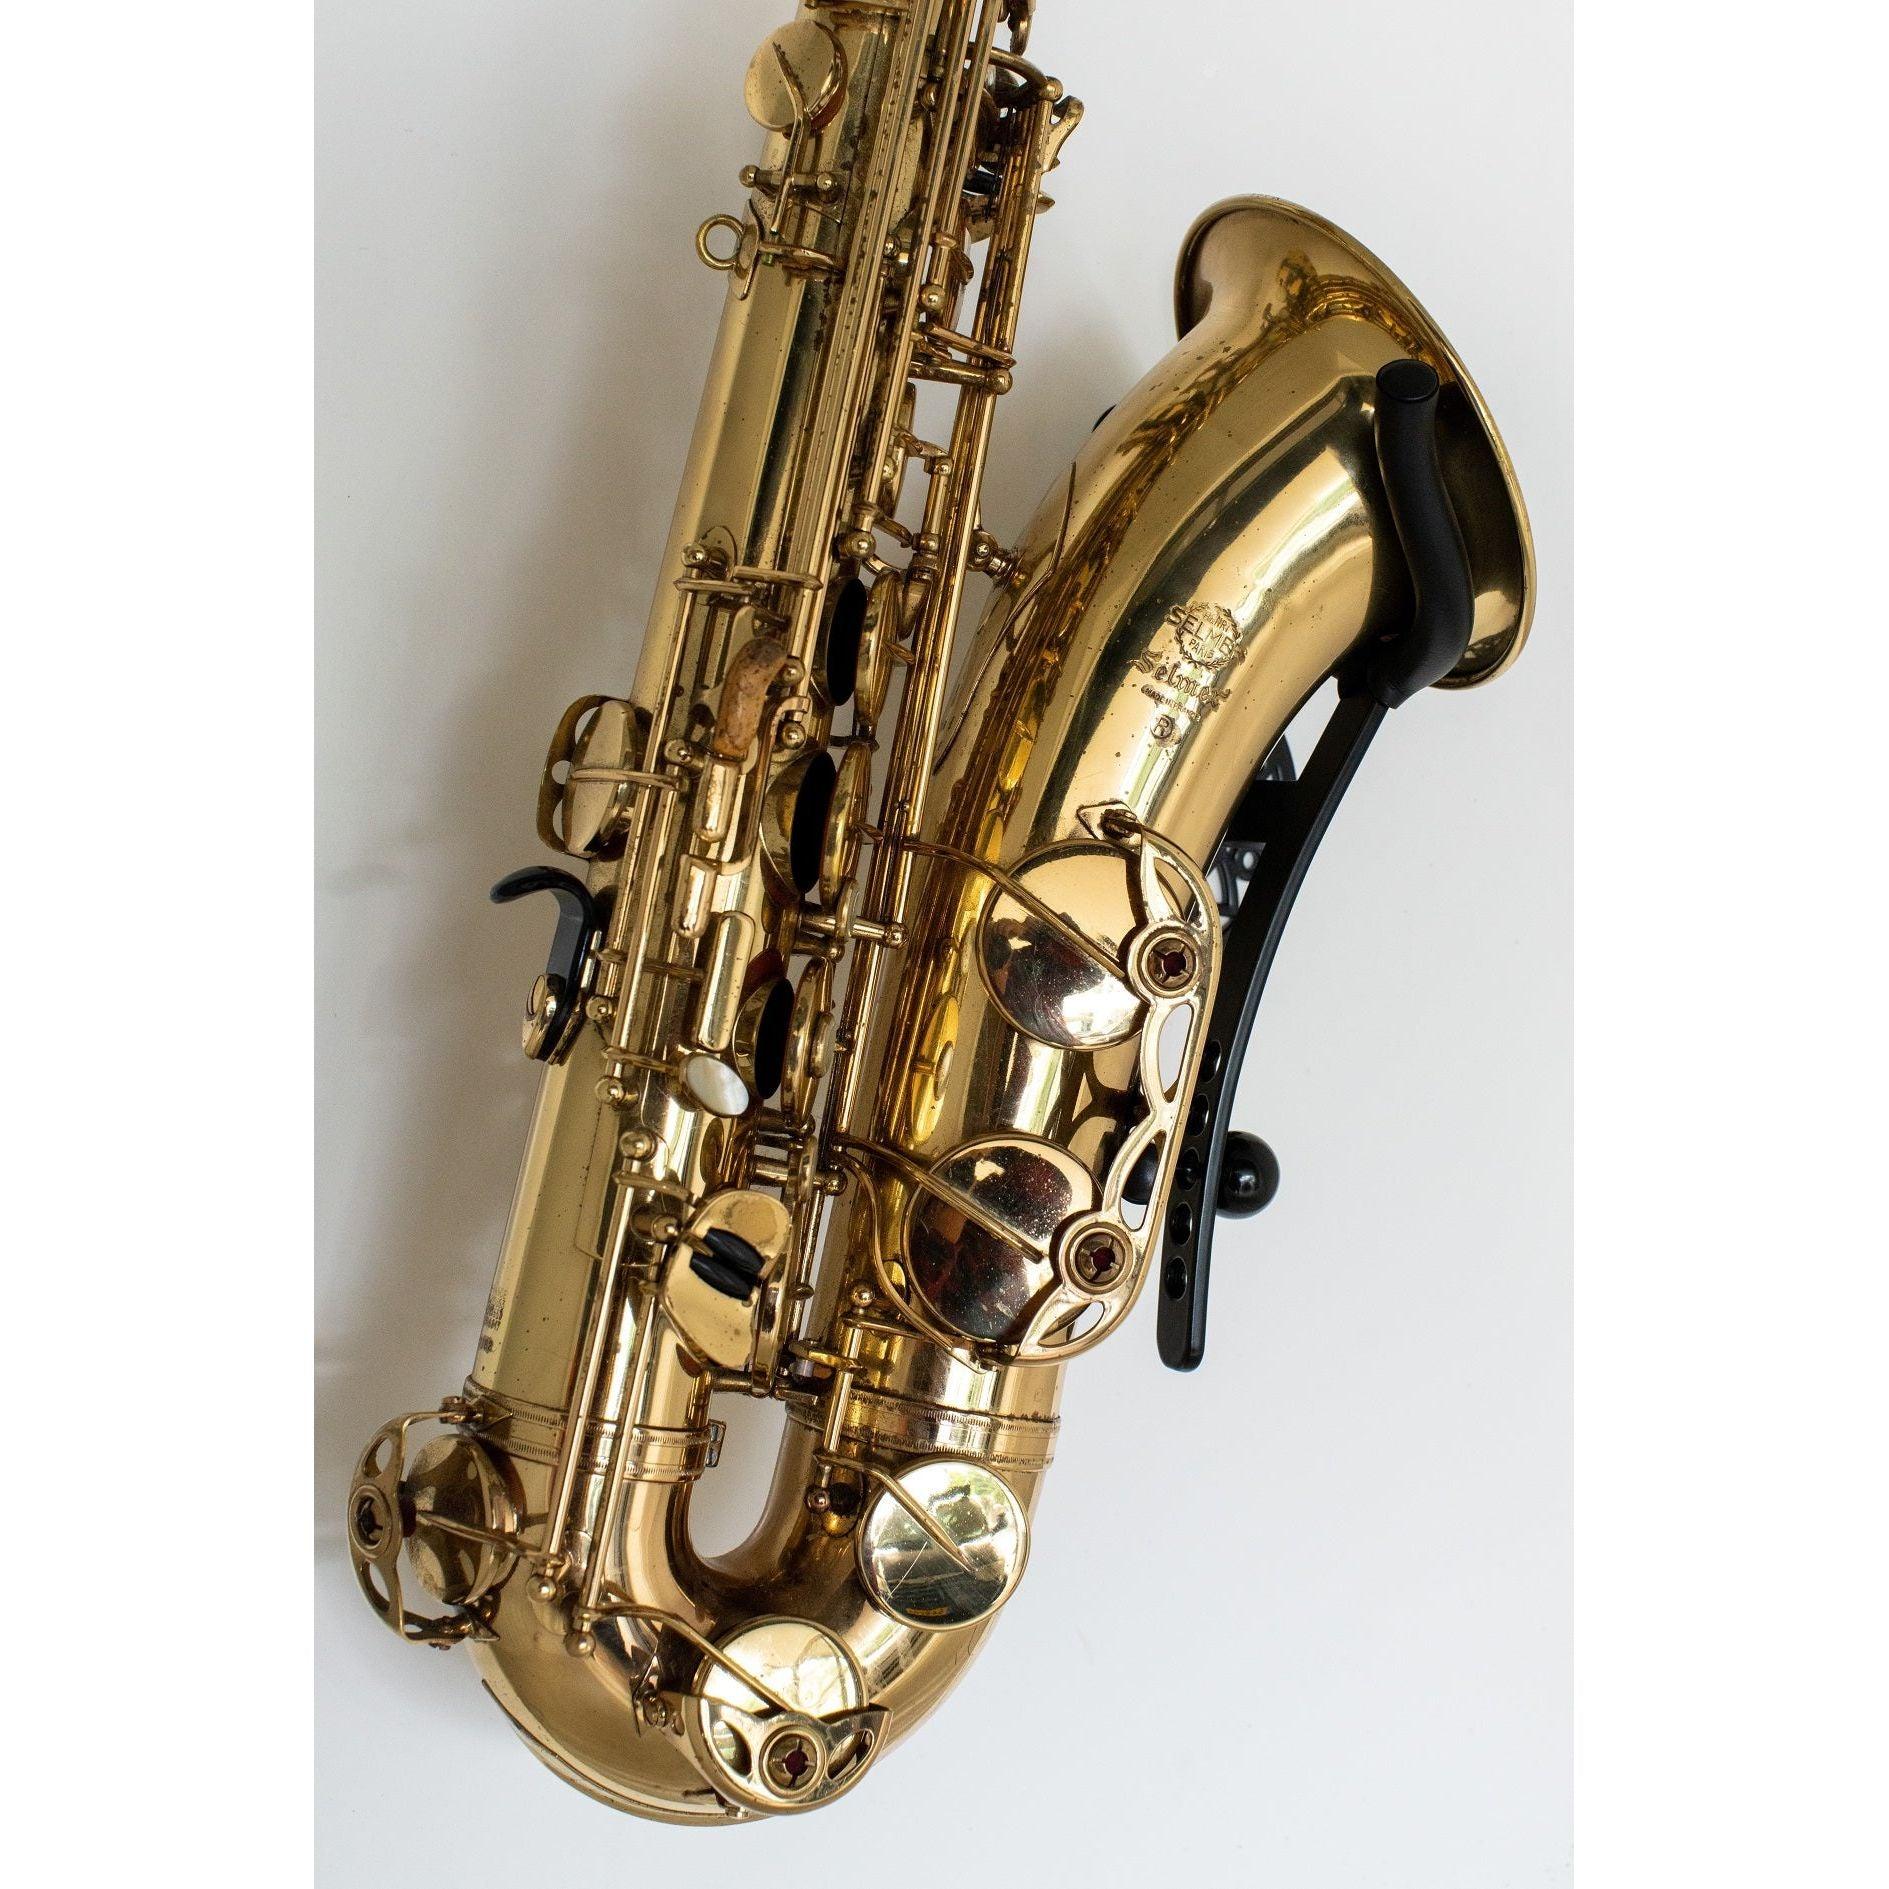 gold Selmer Mark 7 saxophone in wallmount Aztec on white wall by Locoparasaxo.com